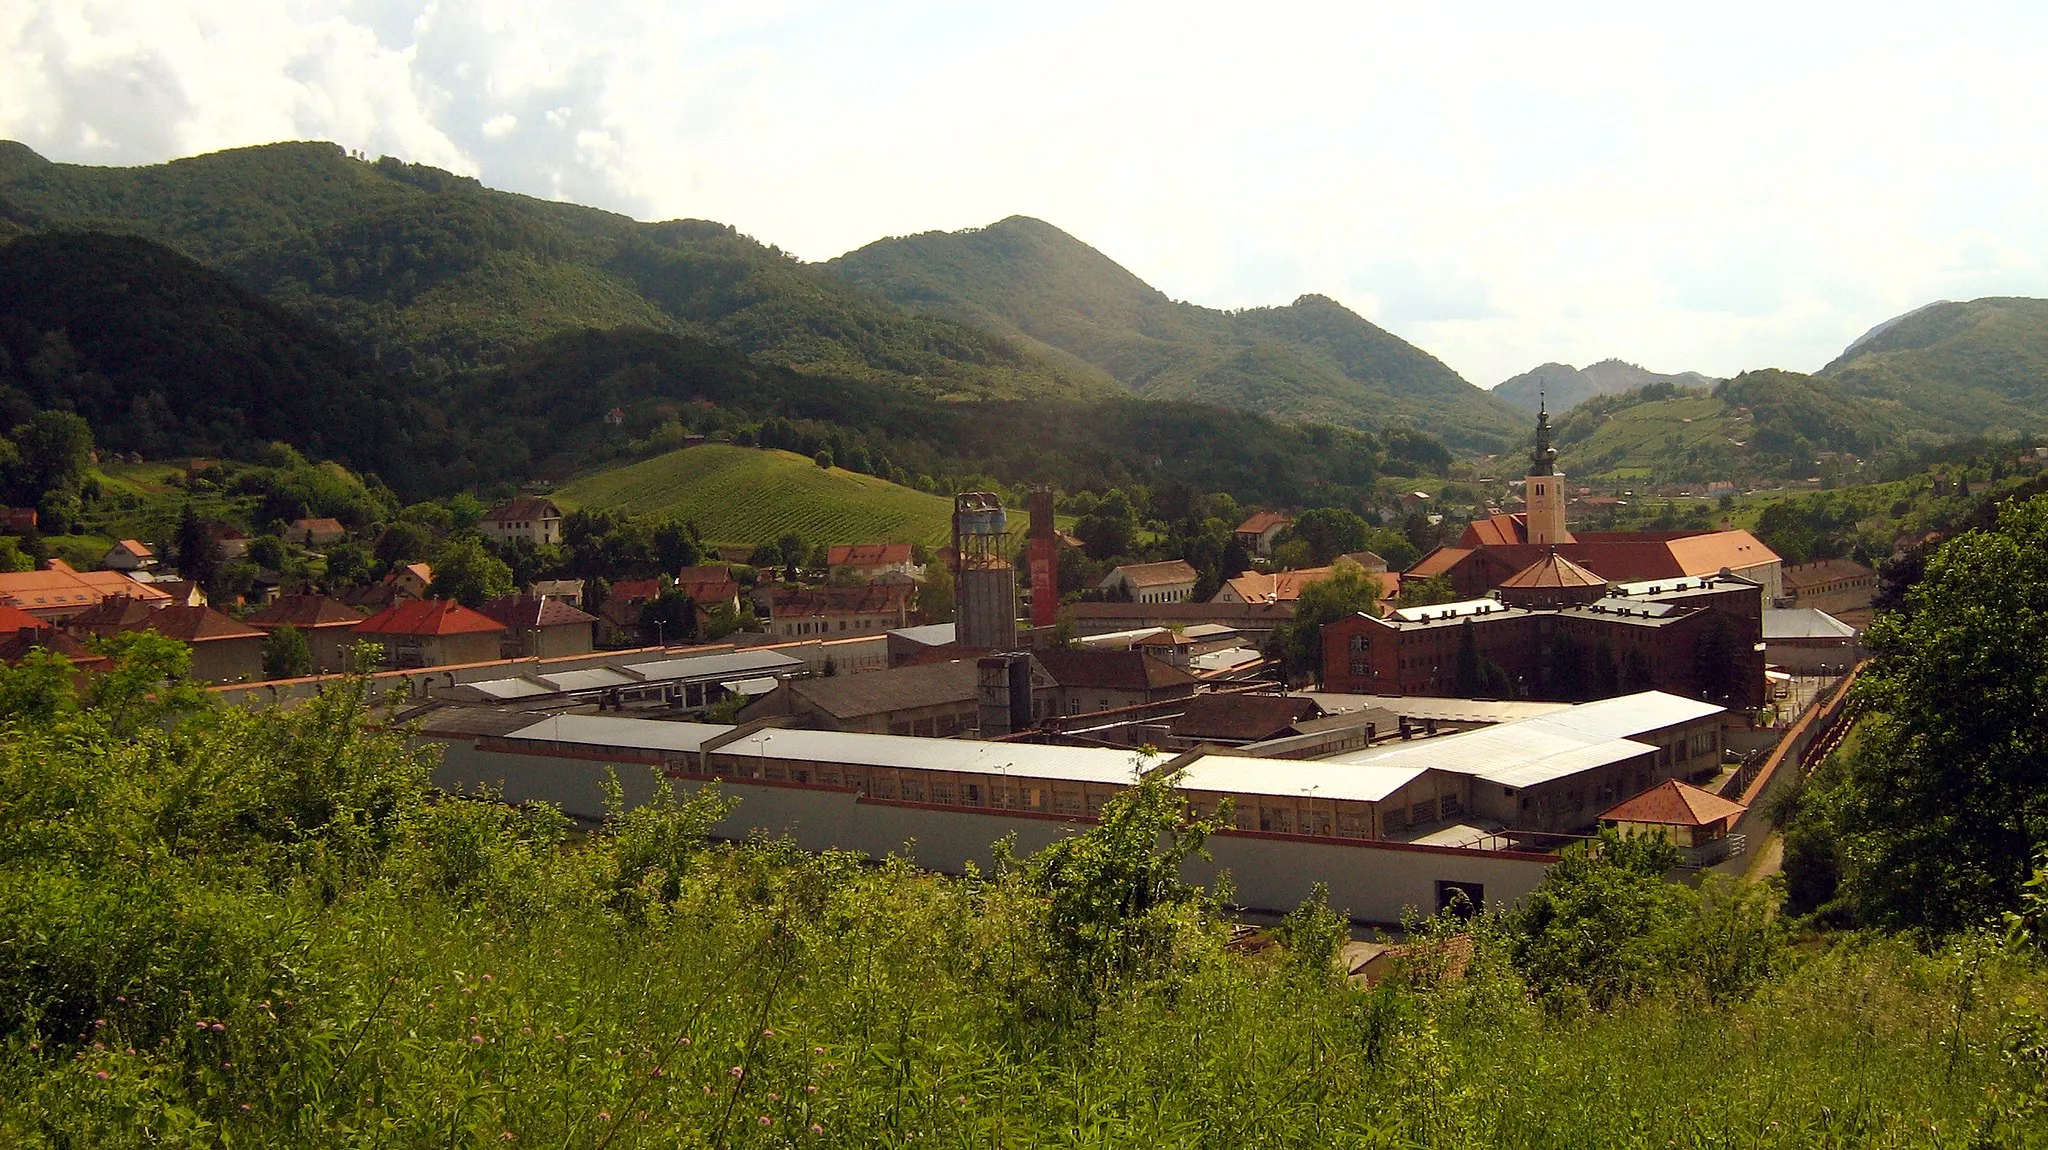 Photo showing: Croatian state penitentiary situated in town Lepoglava in northern Croatia. The Church of the Immaculate Conception of the Blessed Virgin Mary is seen in the background.